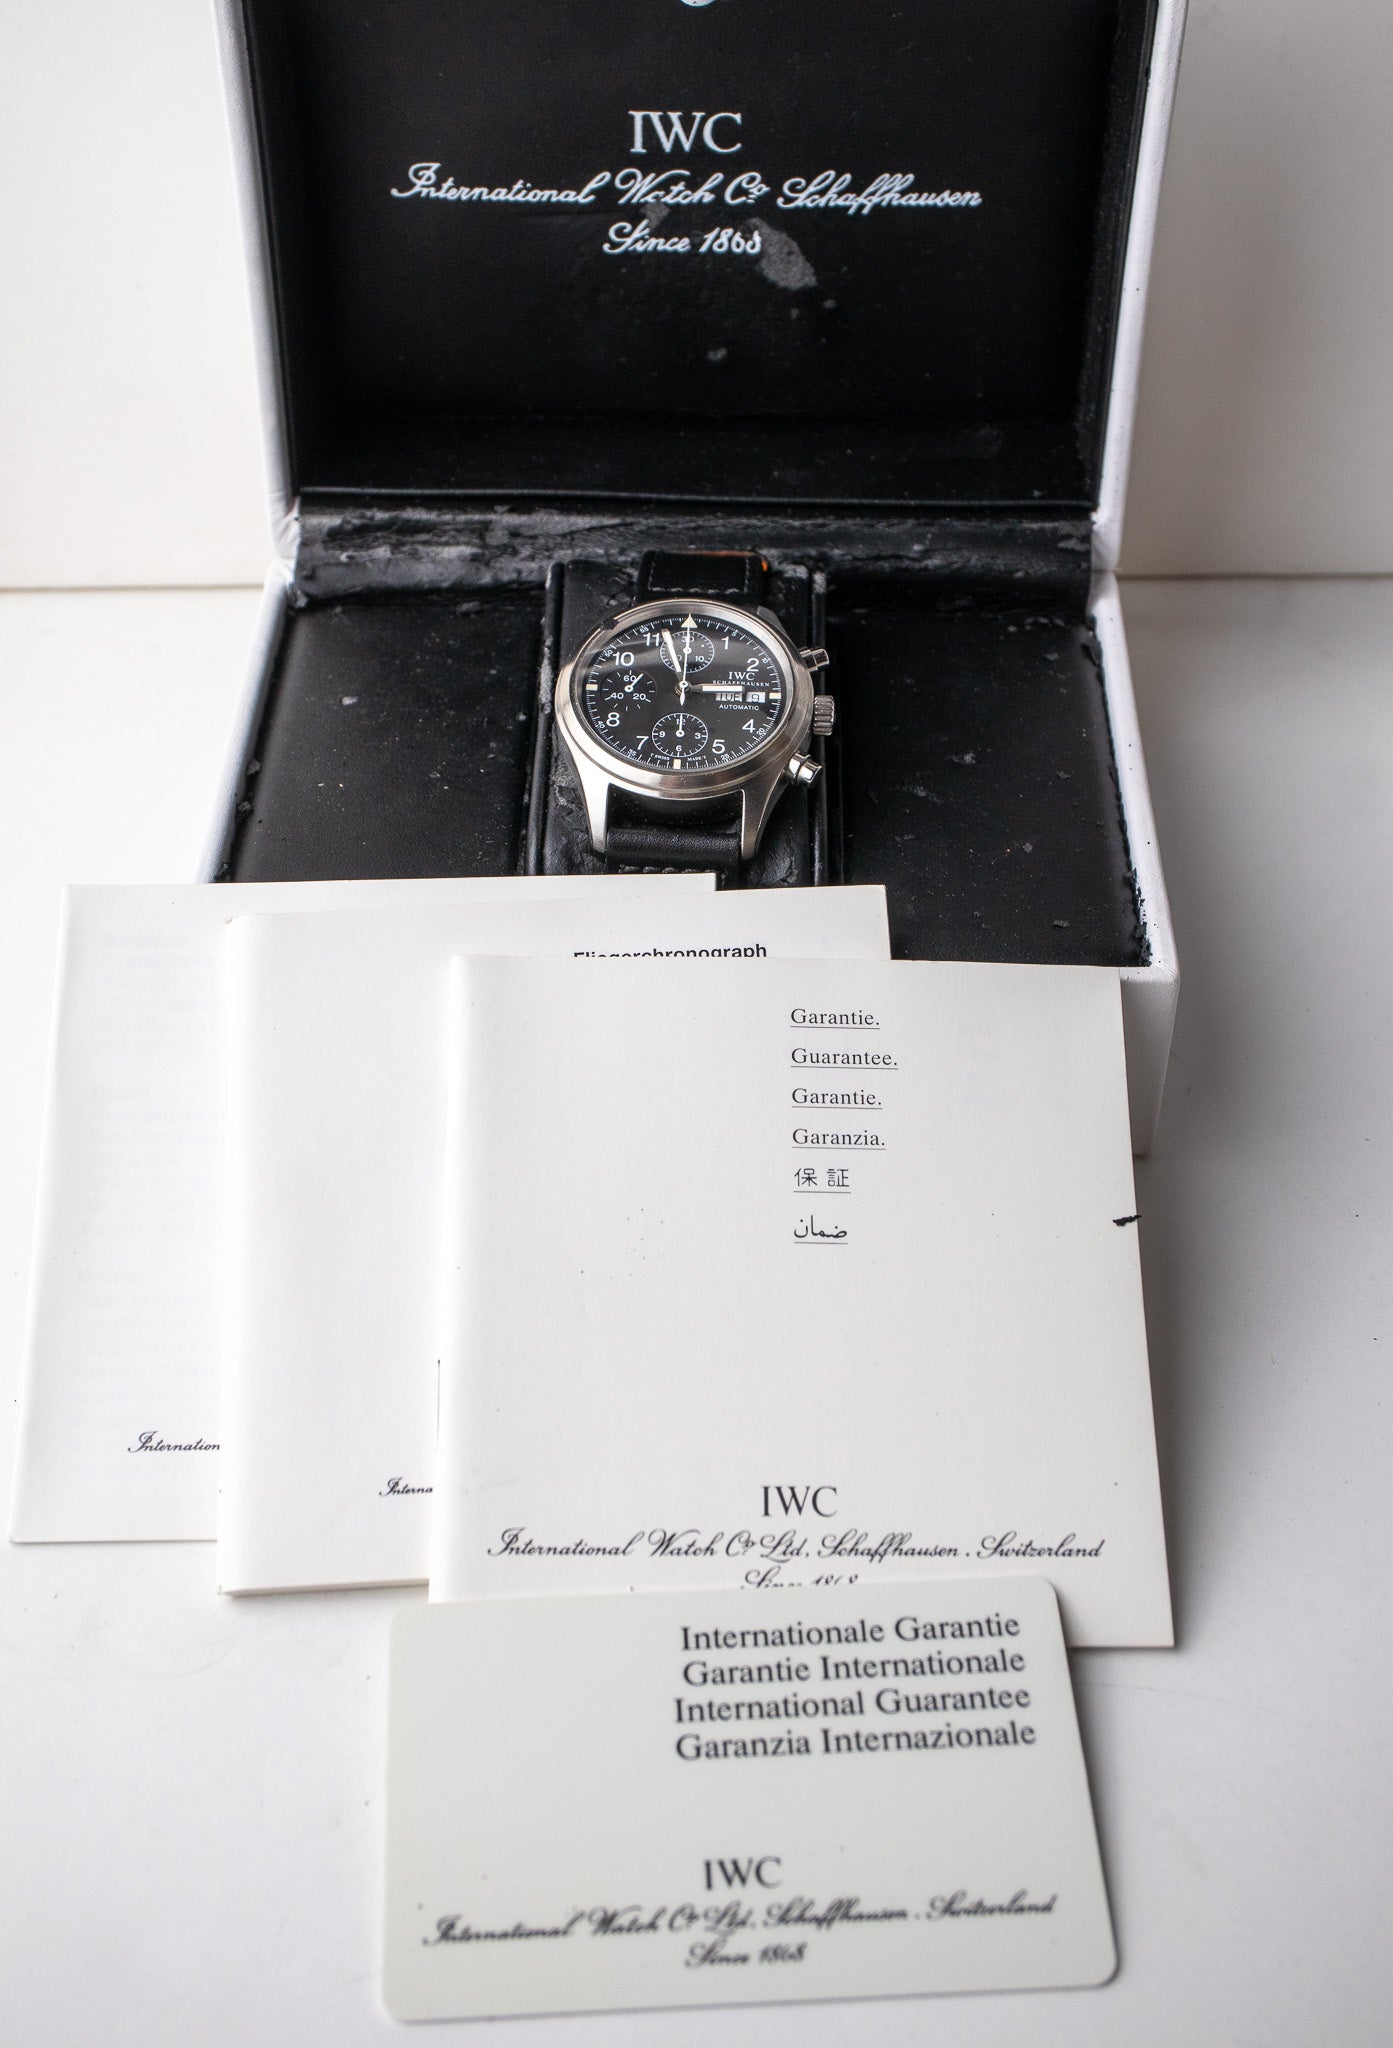 IWC Chronograph Flieger reference 3706 box, booklets, warranty card and watch